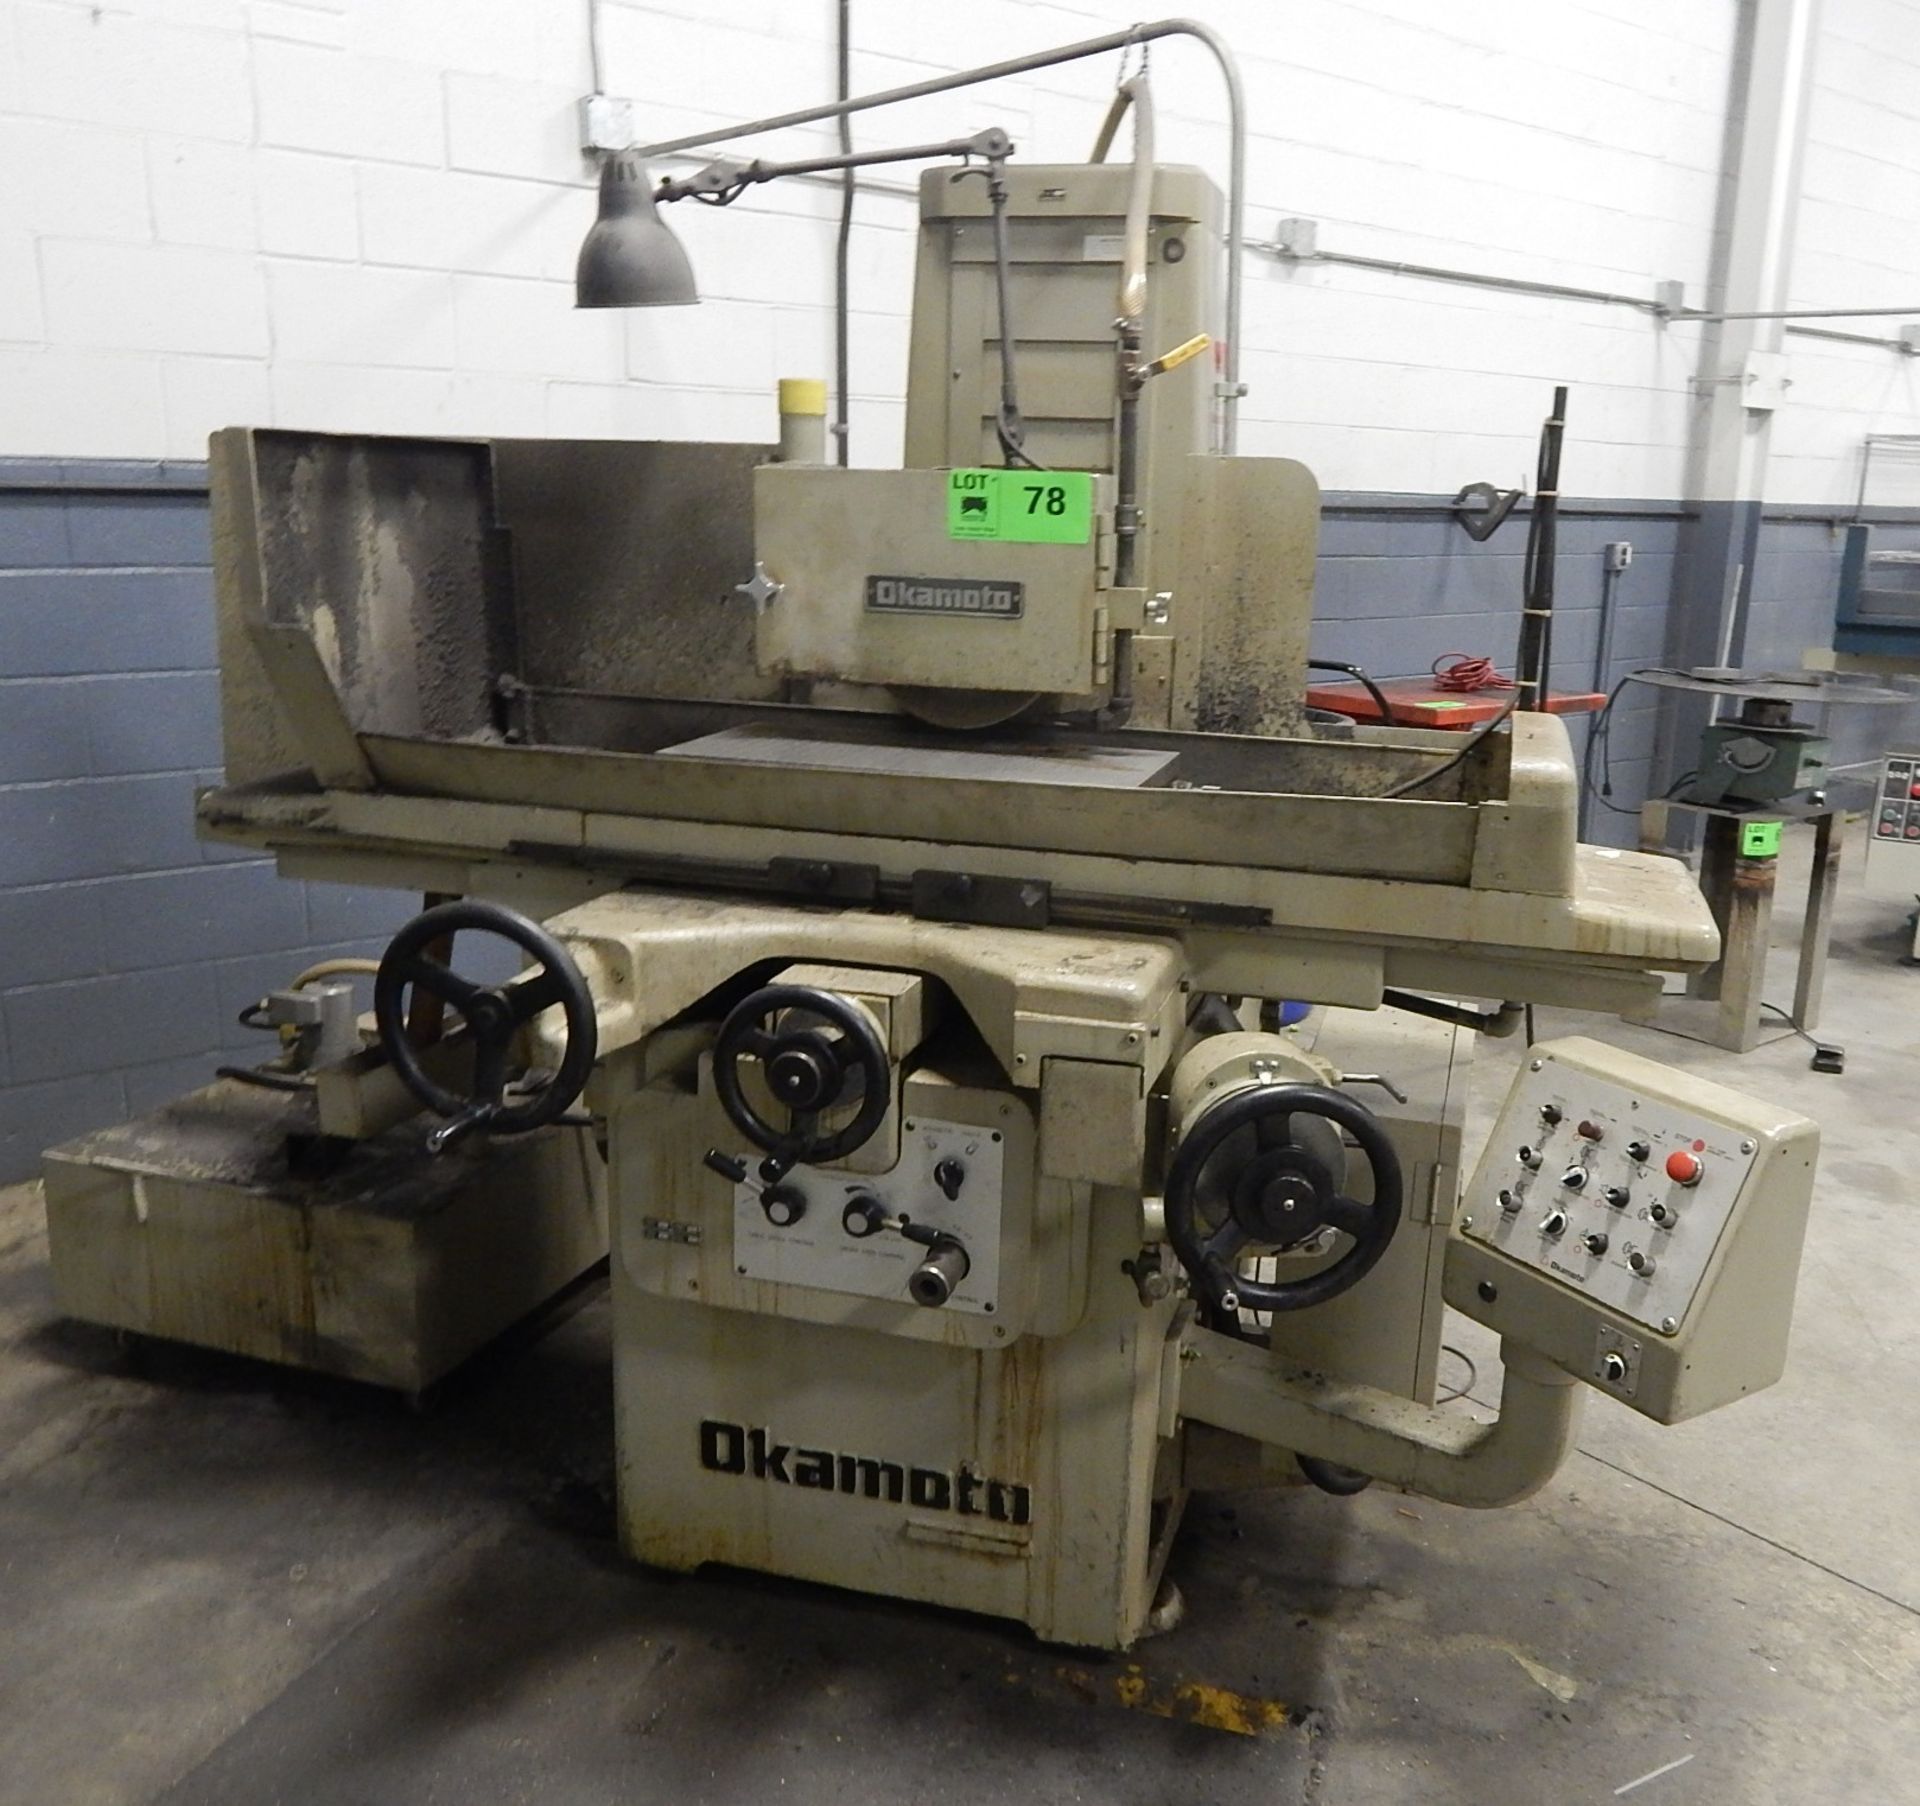 OKAMOTO ACL124N HYDRAULIC SURFACE GRINDER WITH 24" X 12" MAGNETIC BASE PLATE, 10" GRINDING WHEEL, - Image 2 of 2